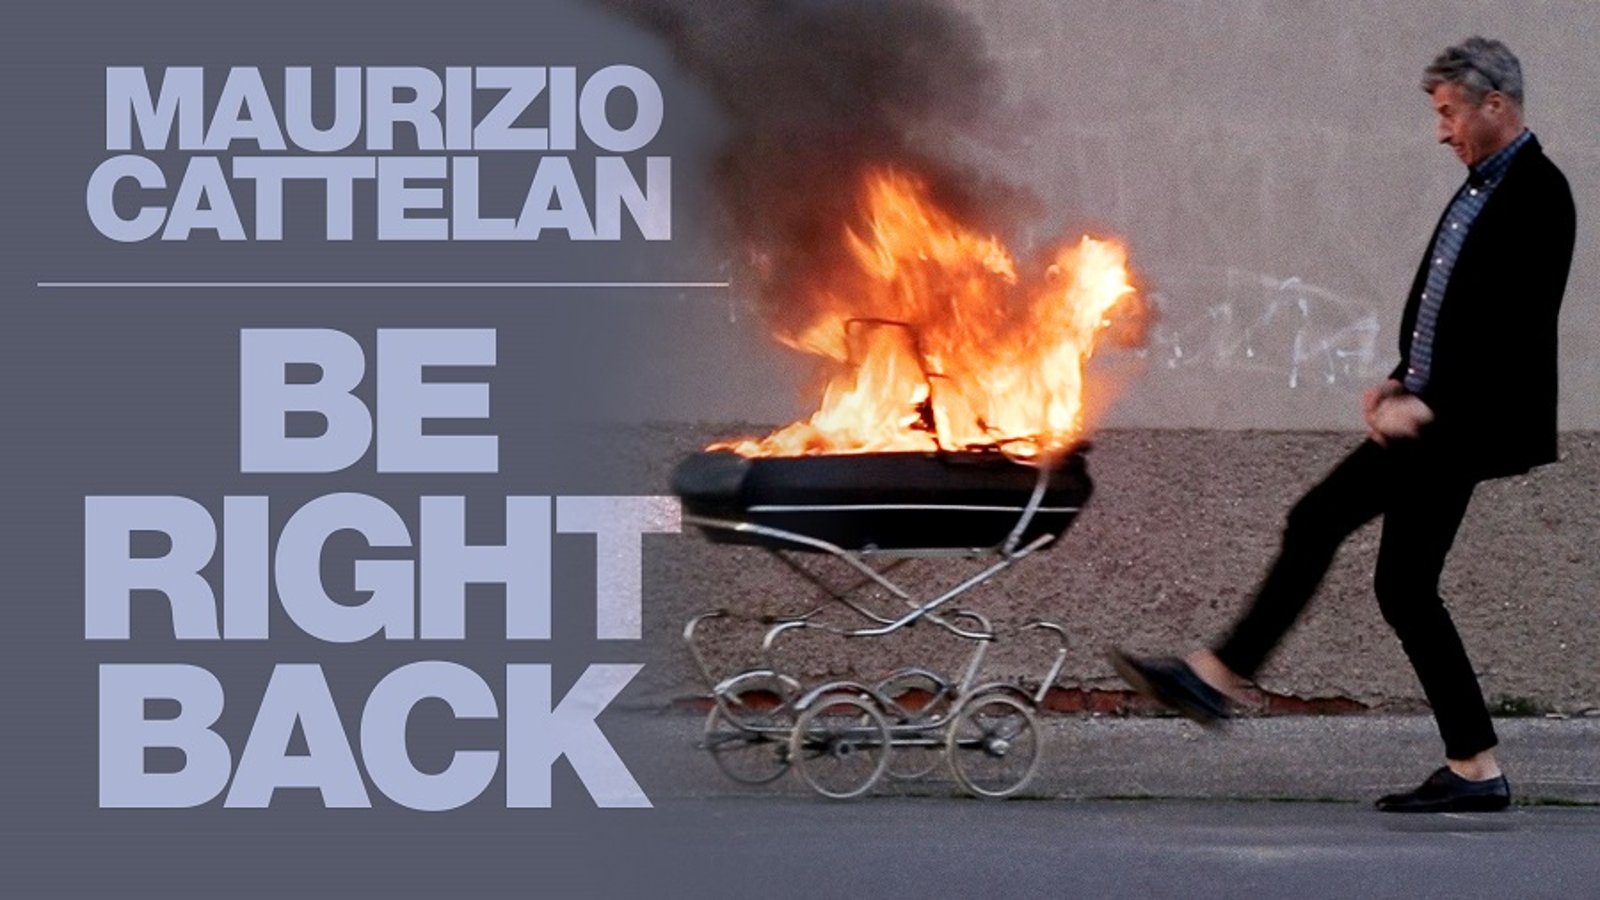 Maurizio Cattelan: Be Right Back - Profile of a Subversive Artist